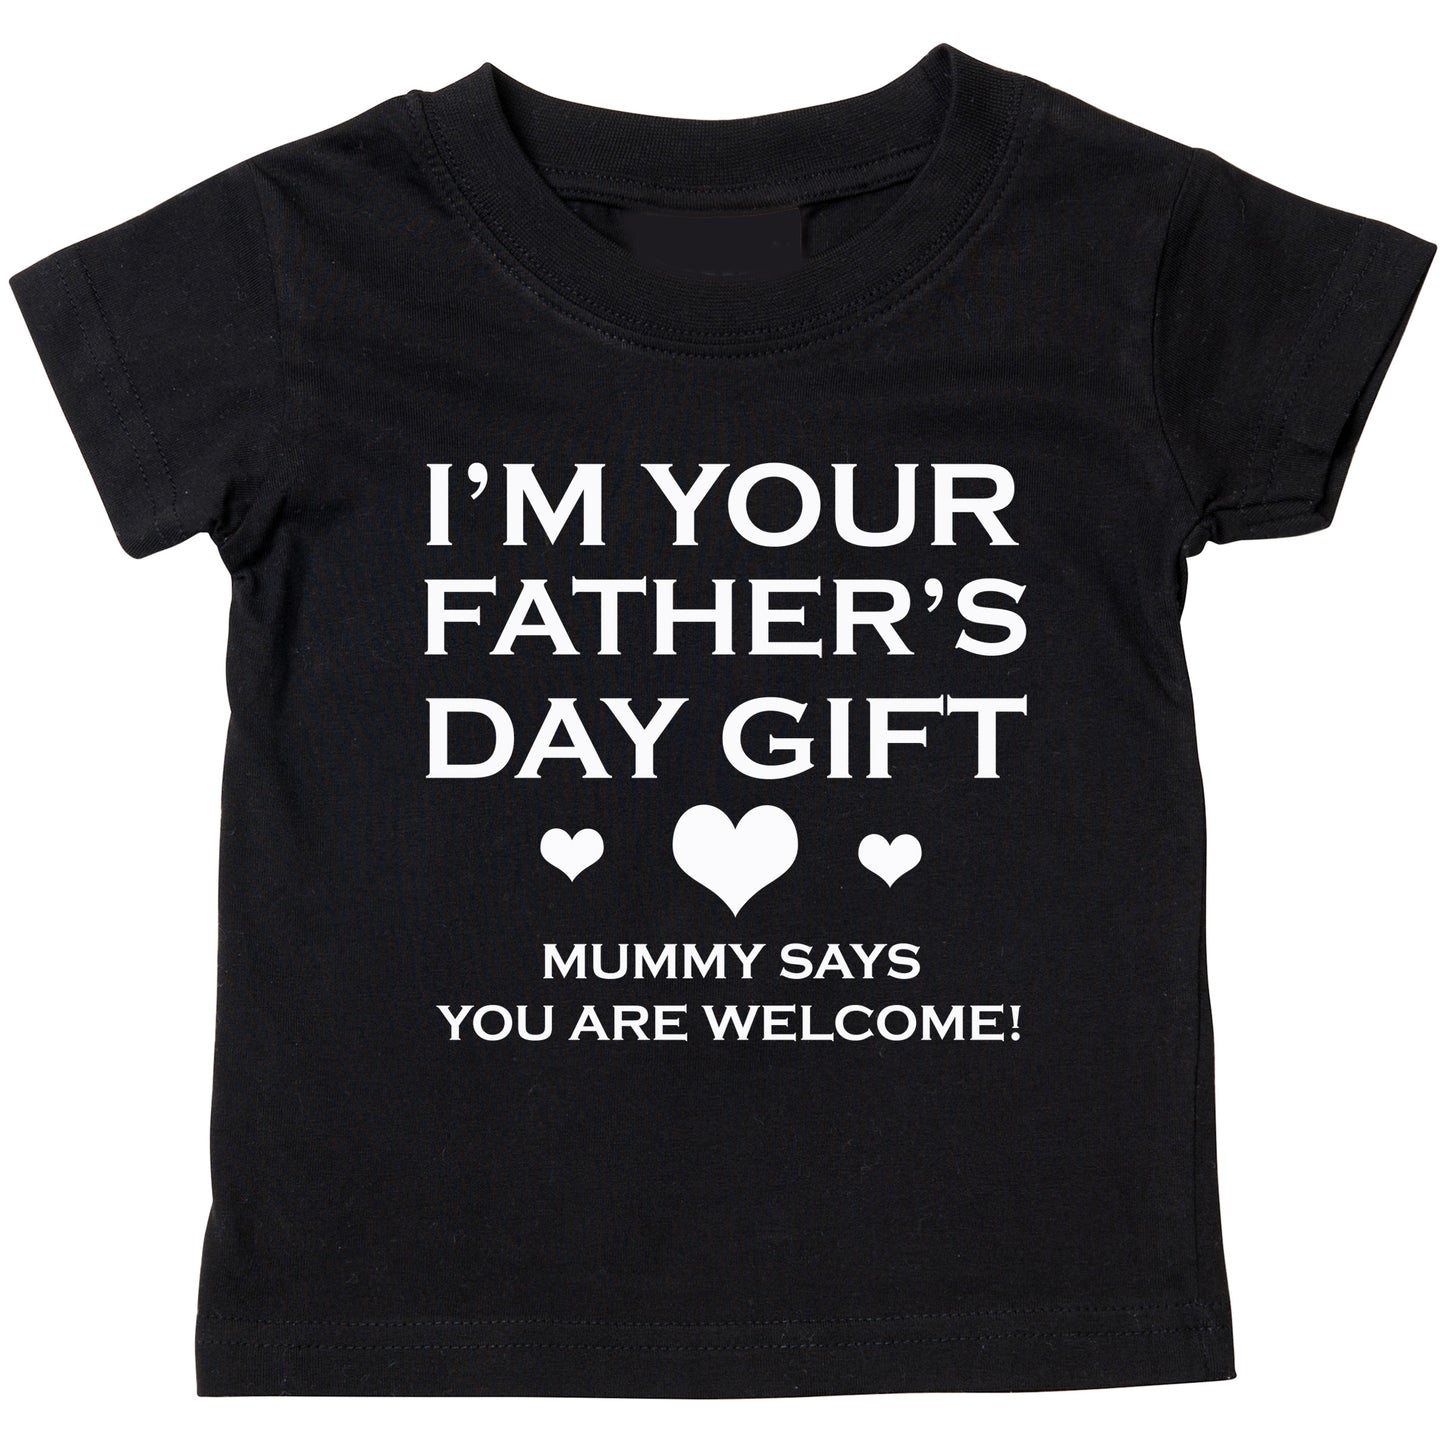 I'm your Father's Day Gift Tshirt (other options available)